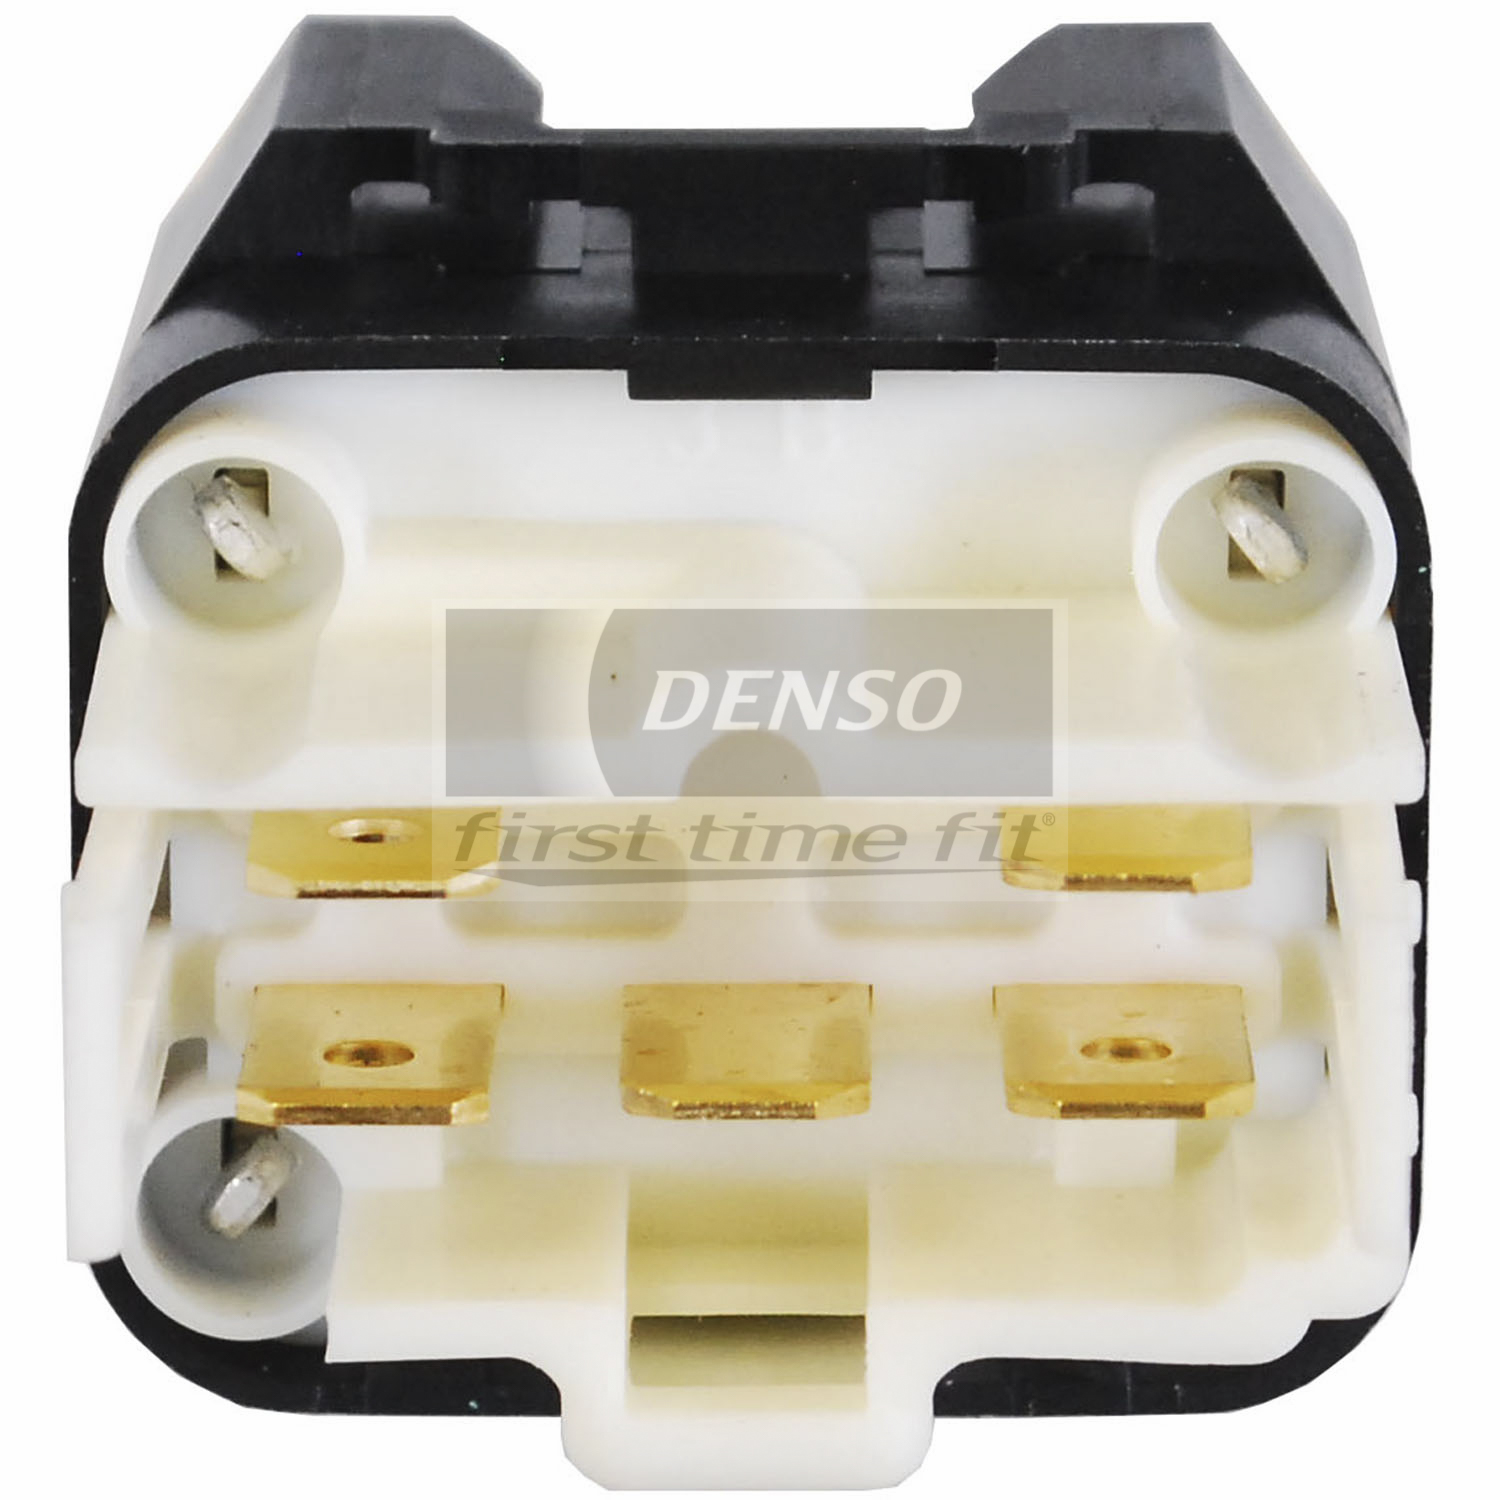 Picture of DENSO Auto Parts 5670038 First Time Fit Relay